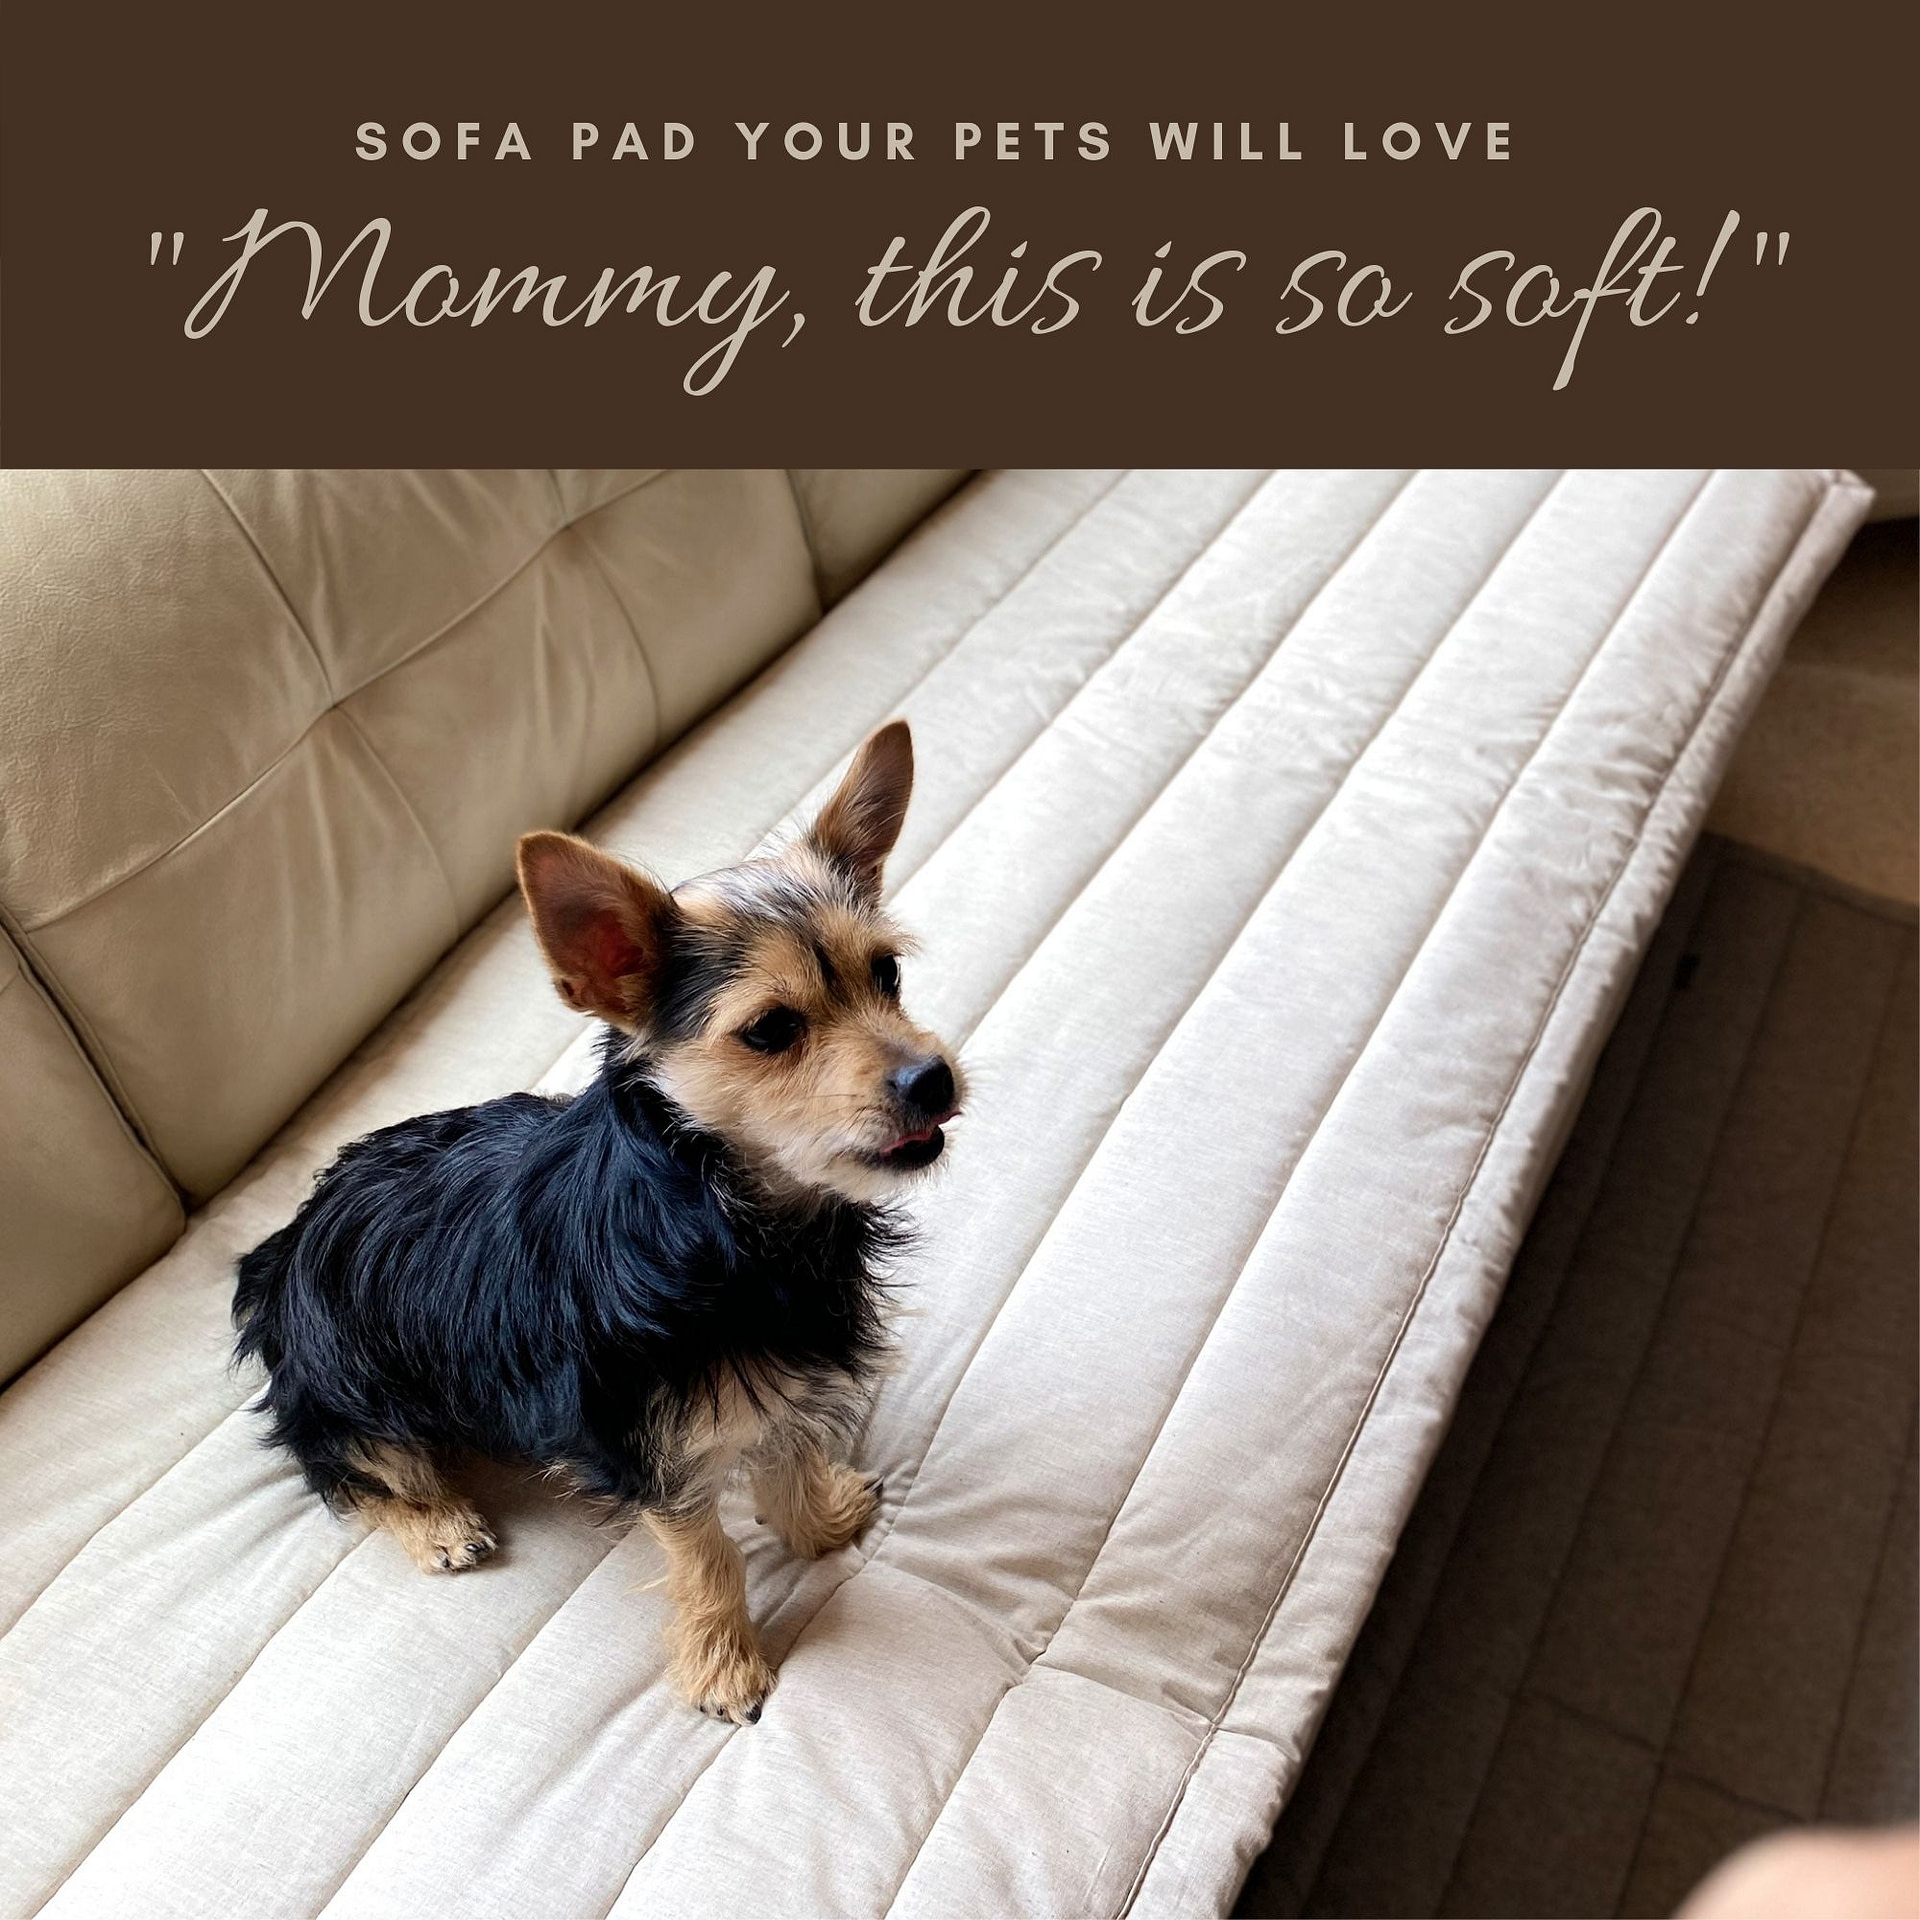 Sofa Seat Toppers - Couch Protector Pad for Dogs & Children. Premium 100%  Cotton, Machine Washable Handmade